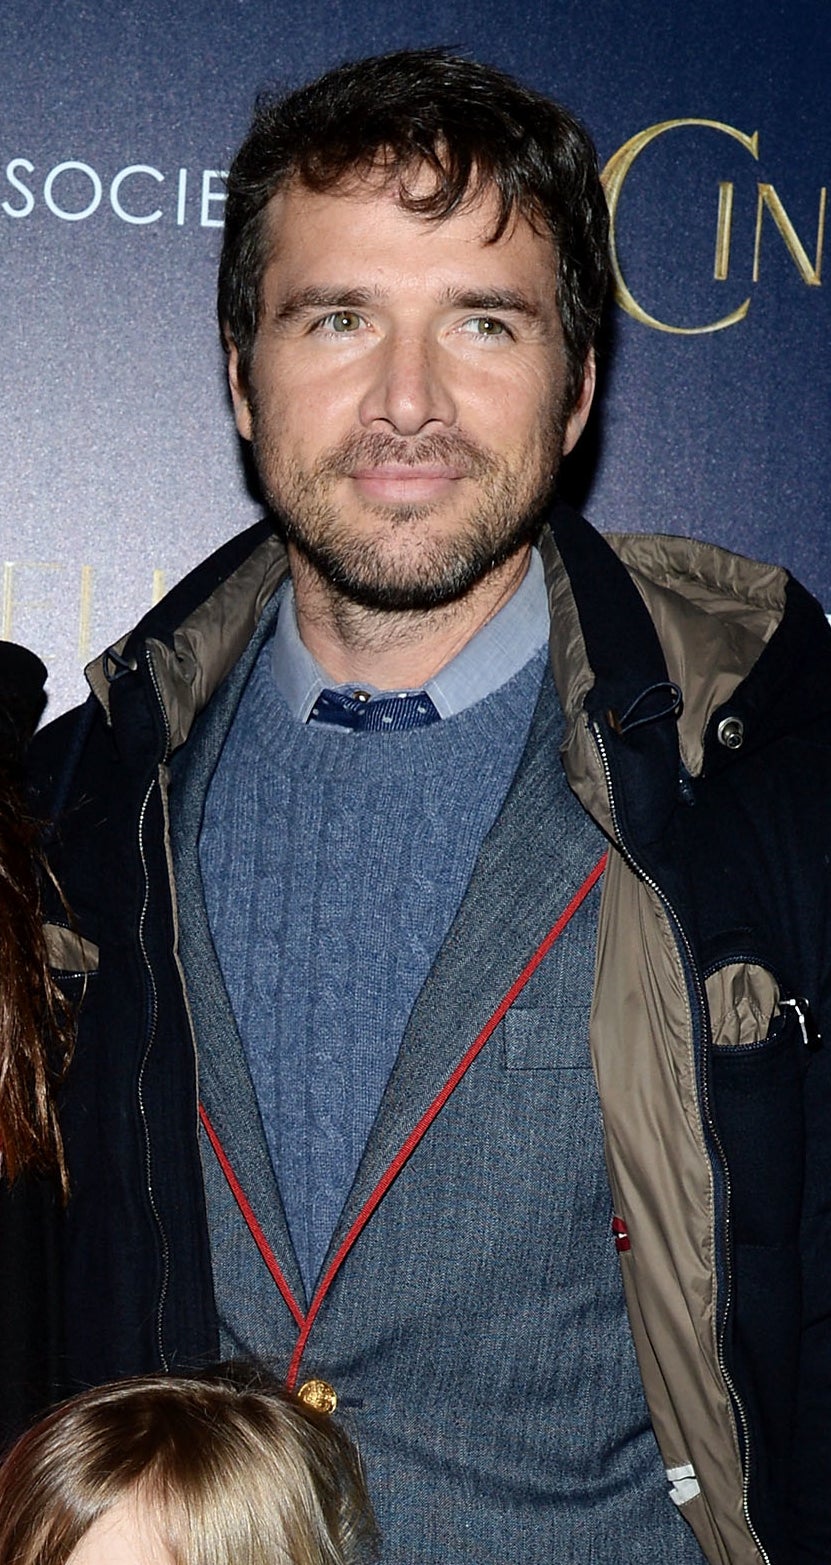 closeup of him in a suit underneath a large jacket